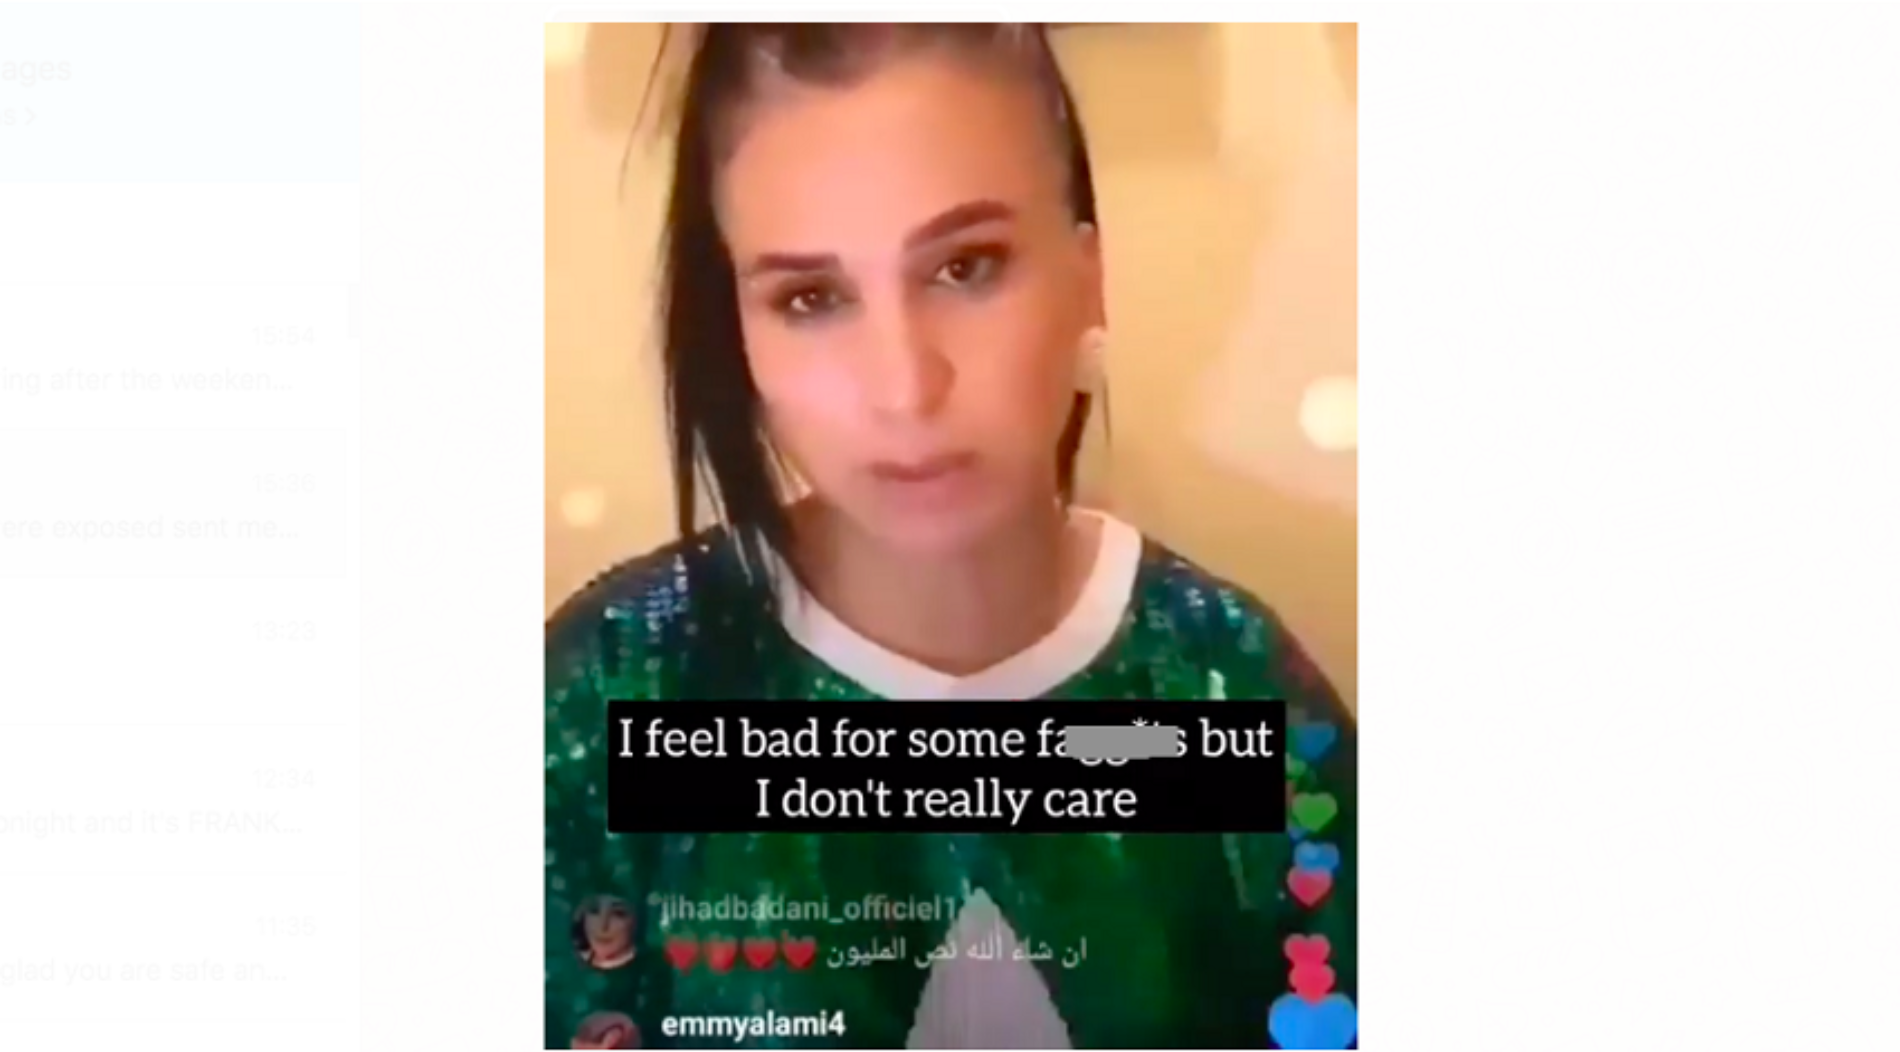 Trans woman in Morocco incites homophobia by encouraging her followers to use dating apps to hunt down and out gay men